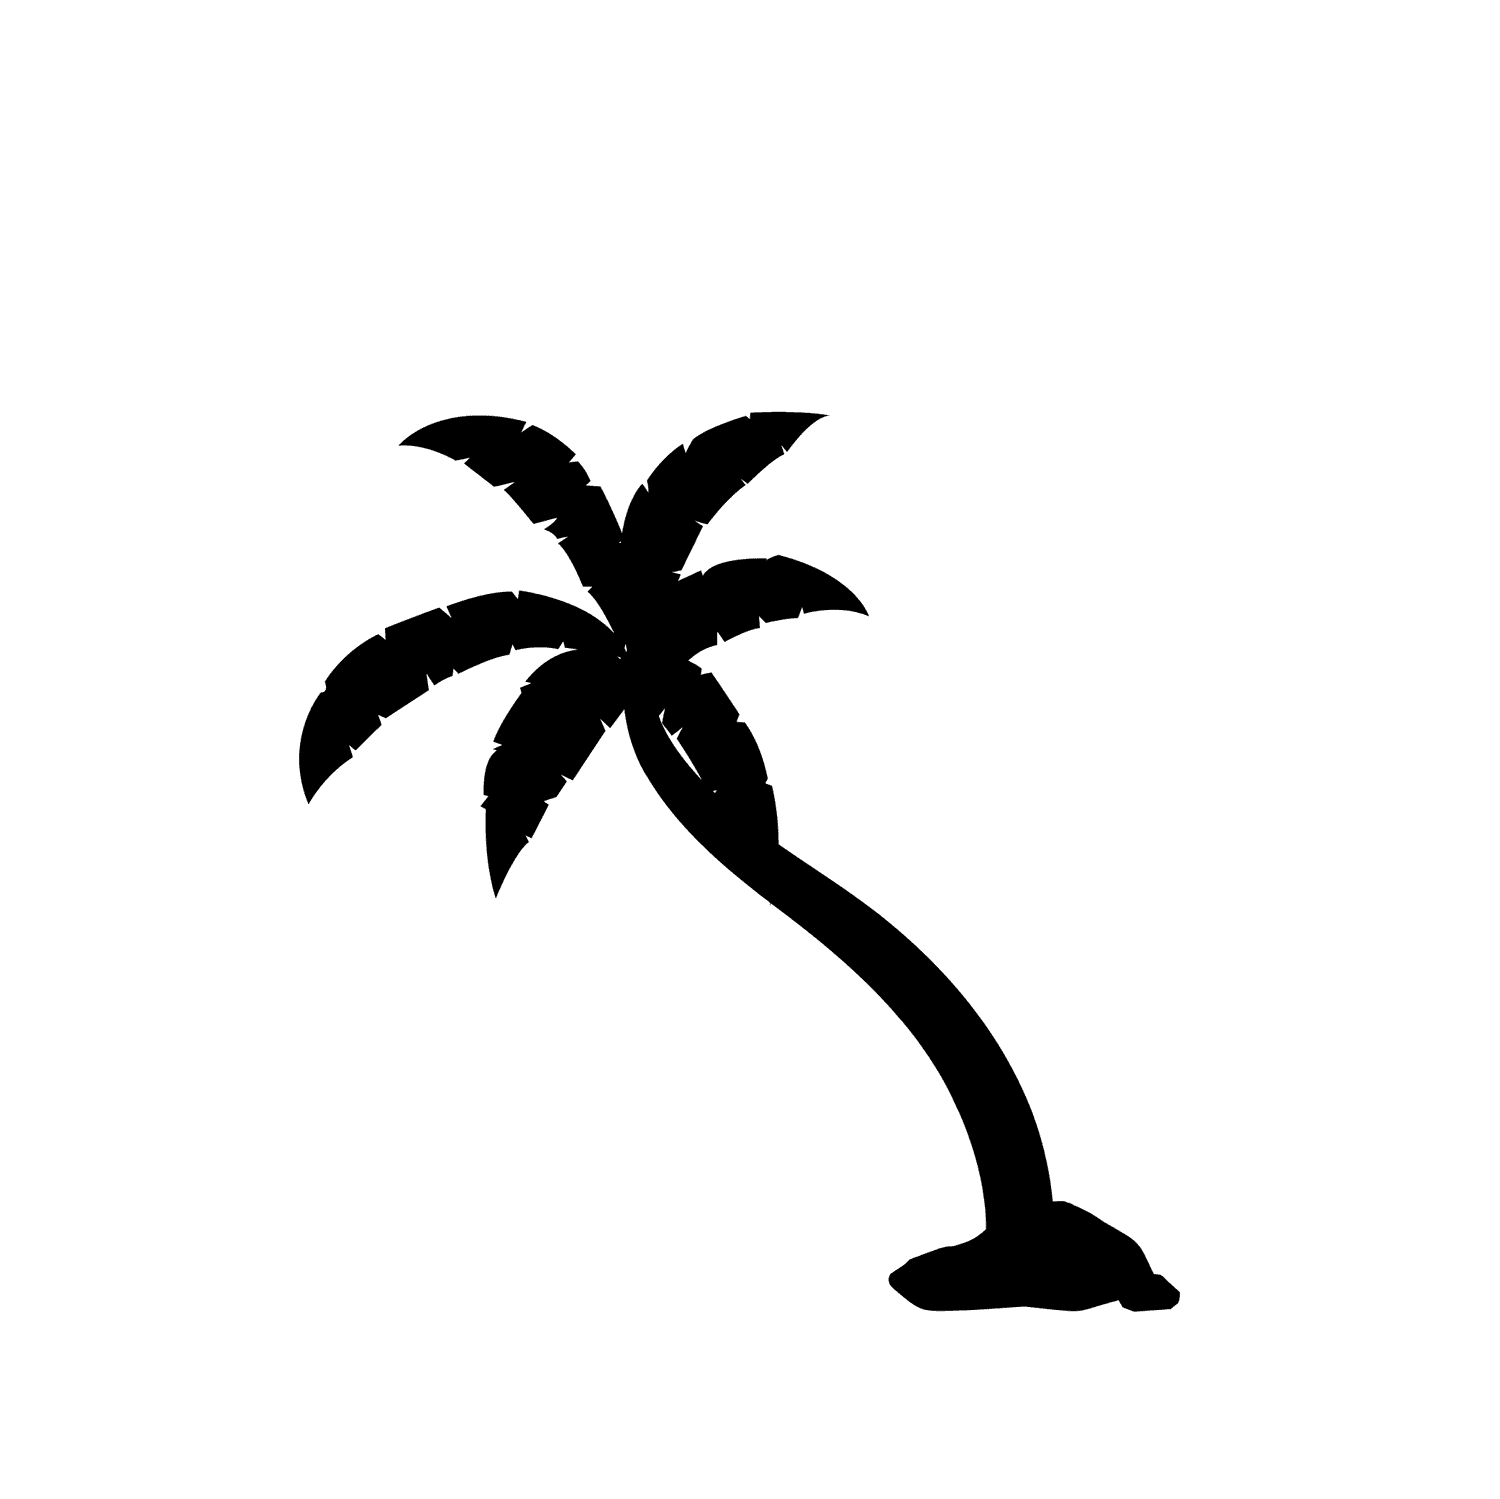 coconut palm tree silhouettes in a minimalist style